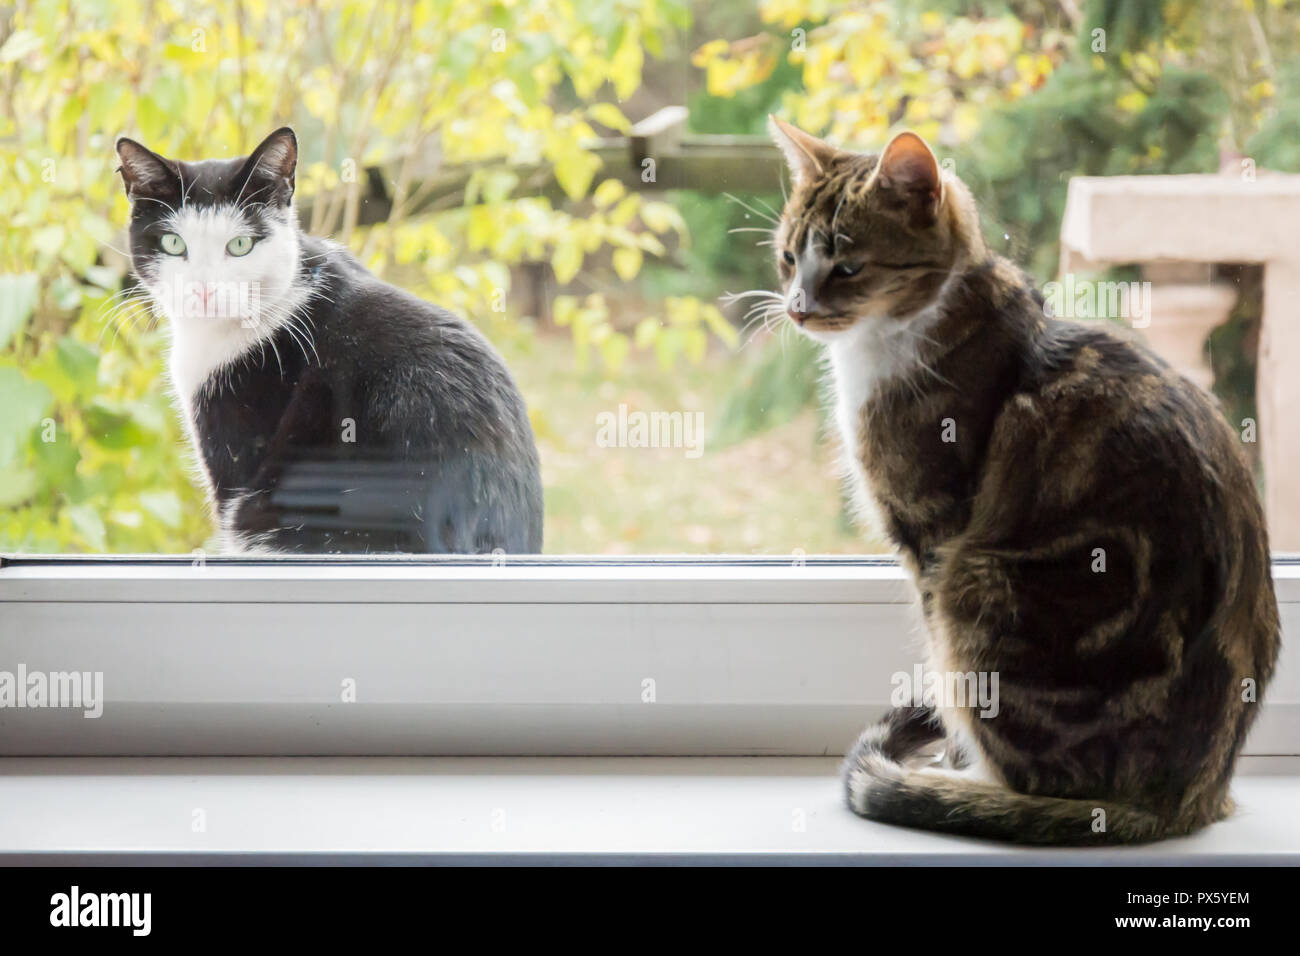 Two cats on a windowsill - one inside and the other outside - garden in the background Stock Photo